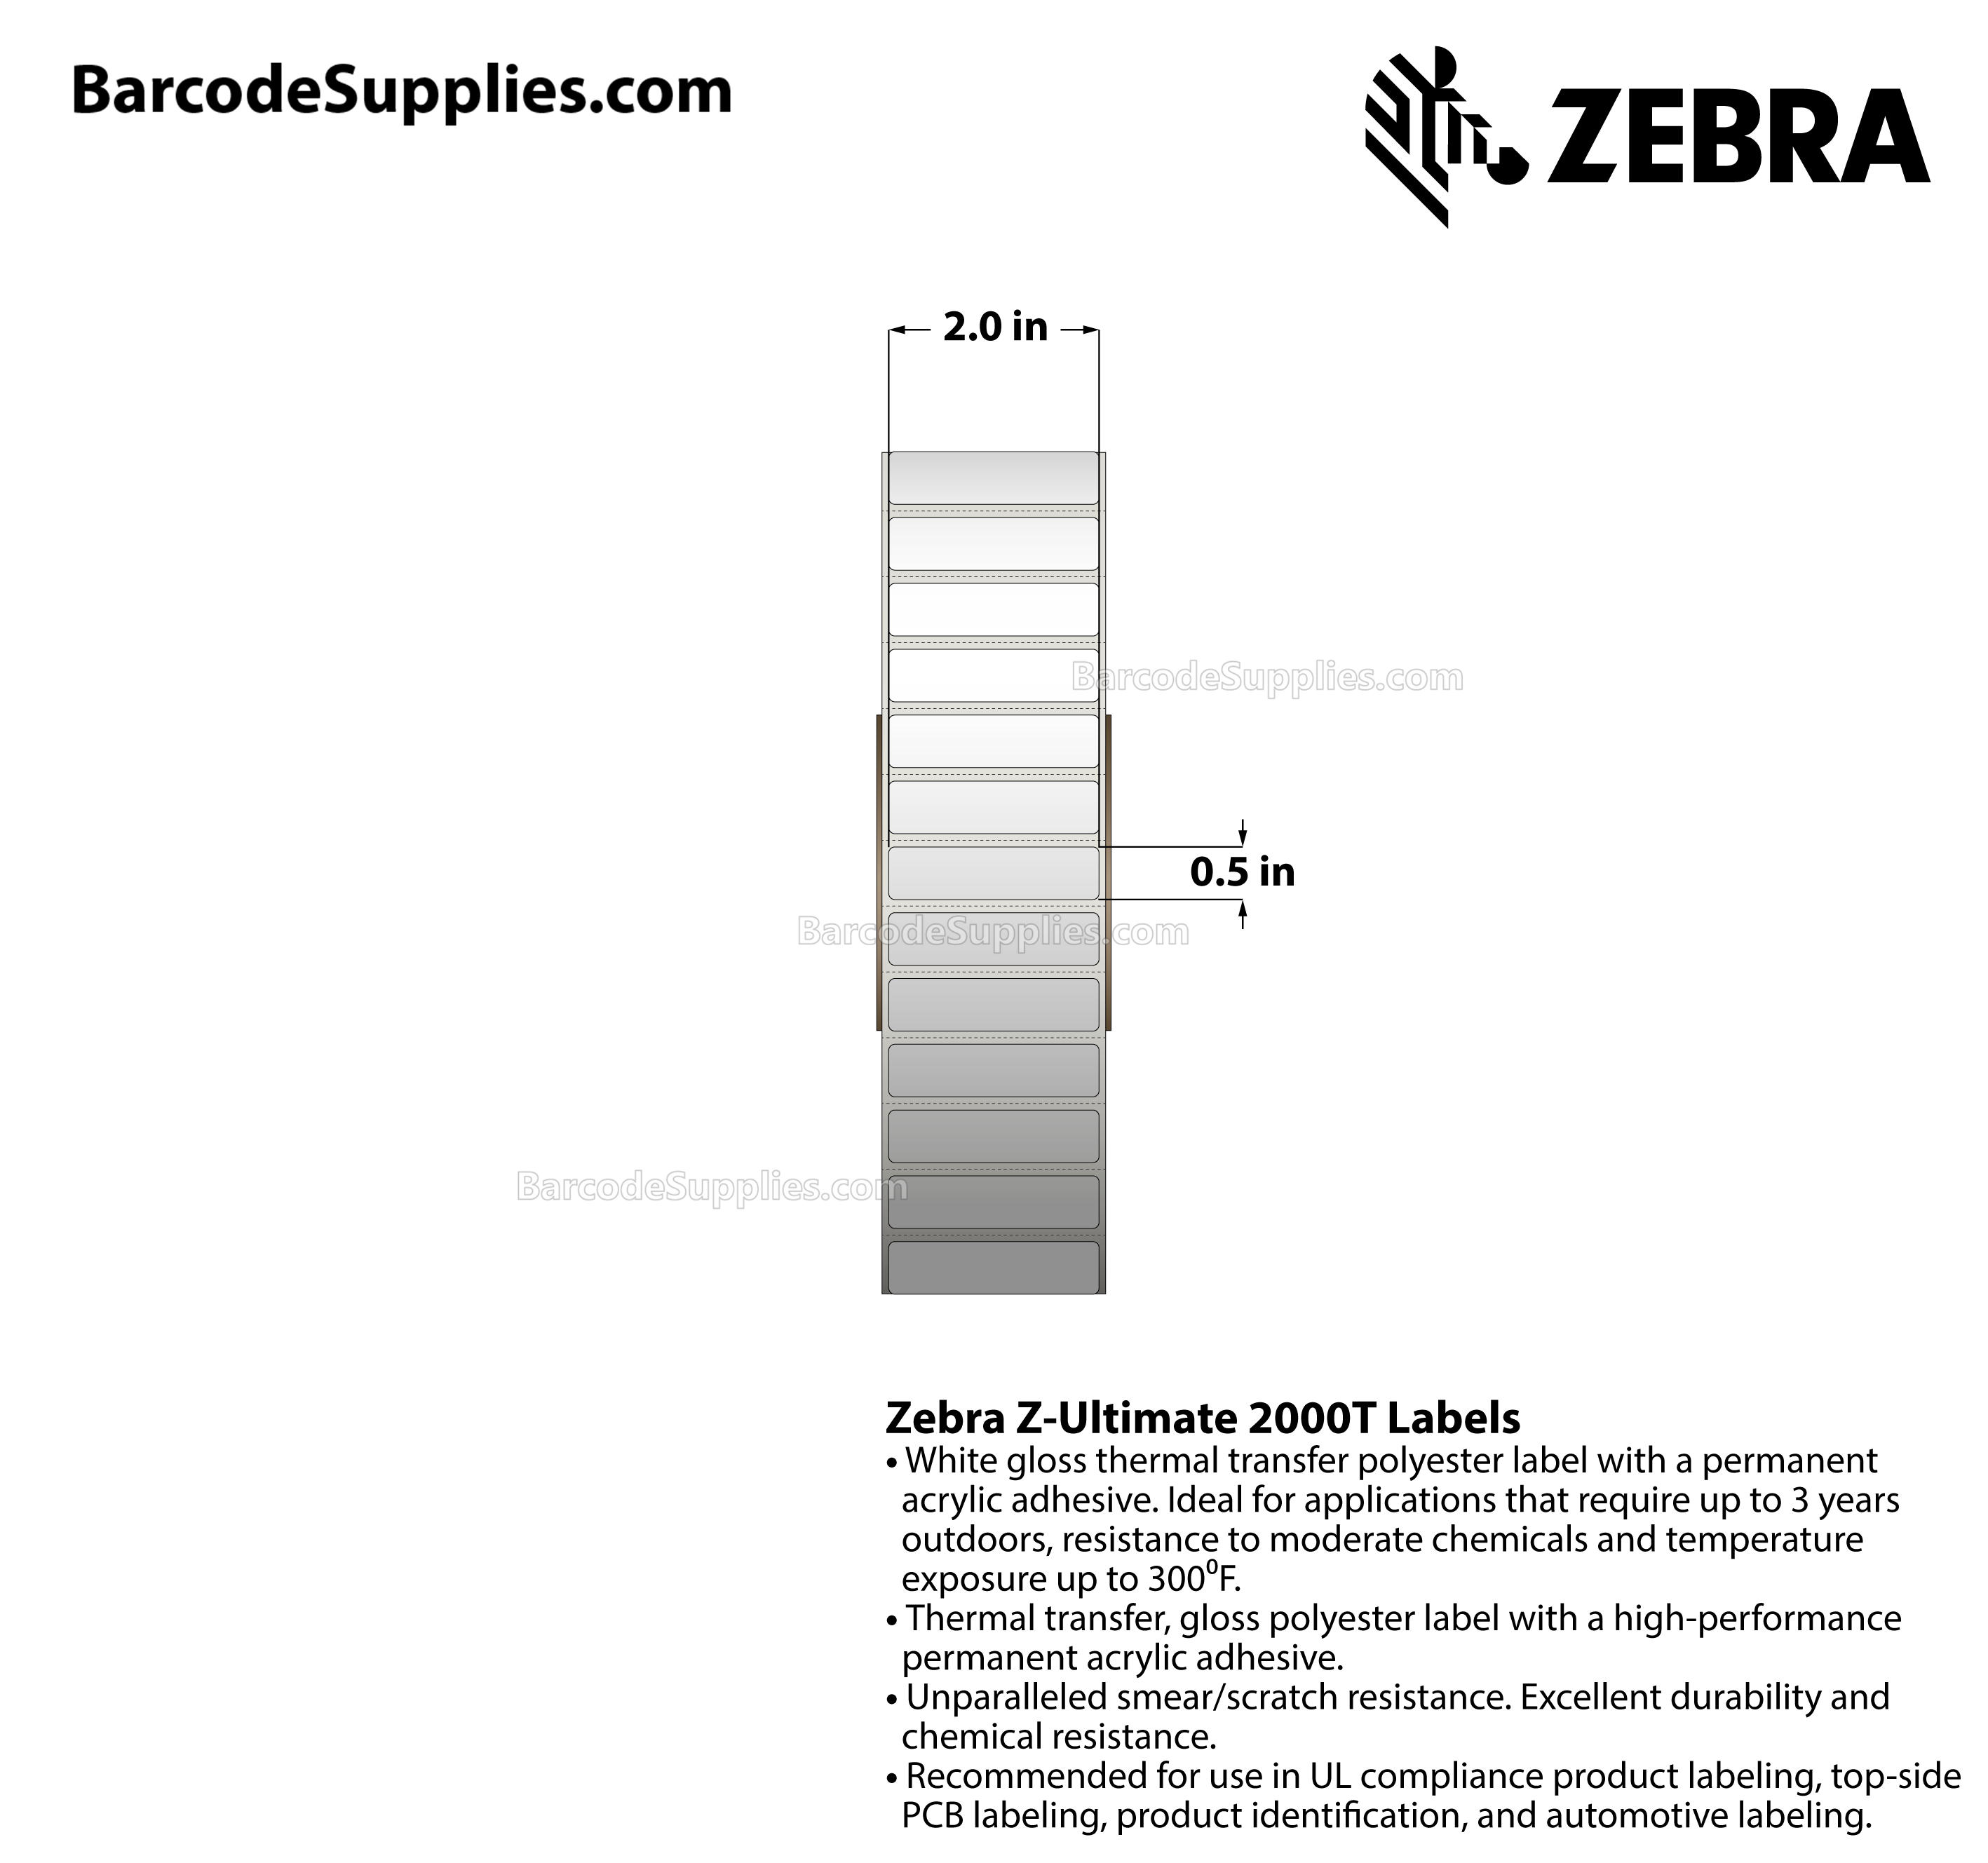 2 x 0.5 Thermal Transfer White Z-Ultimate 2000T Labels With Permanent Adhesive - Perforated - 9874 Labels Per Roll - Carton Of 4 Rolls - 39496 Labels Total - MPN: 10011985